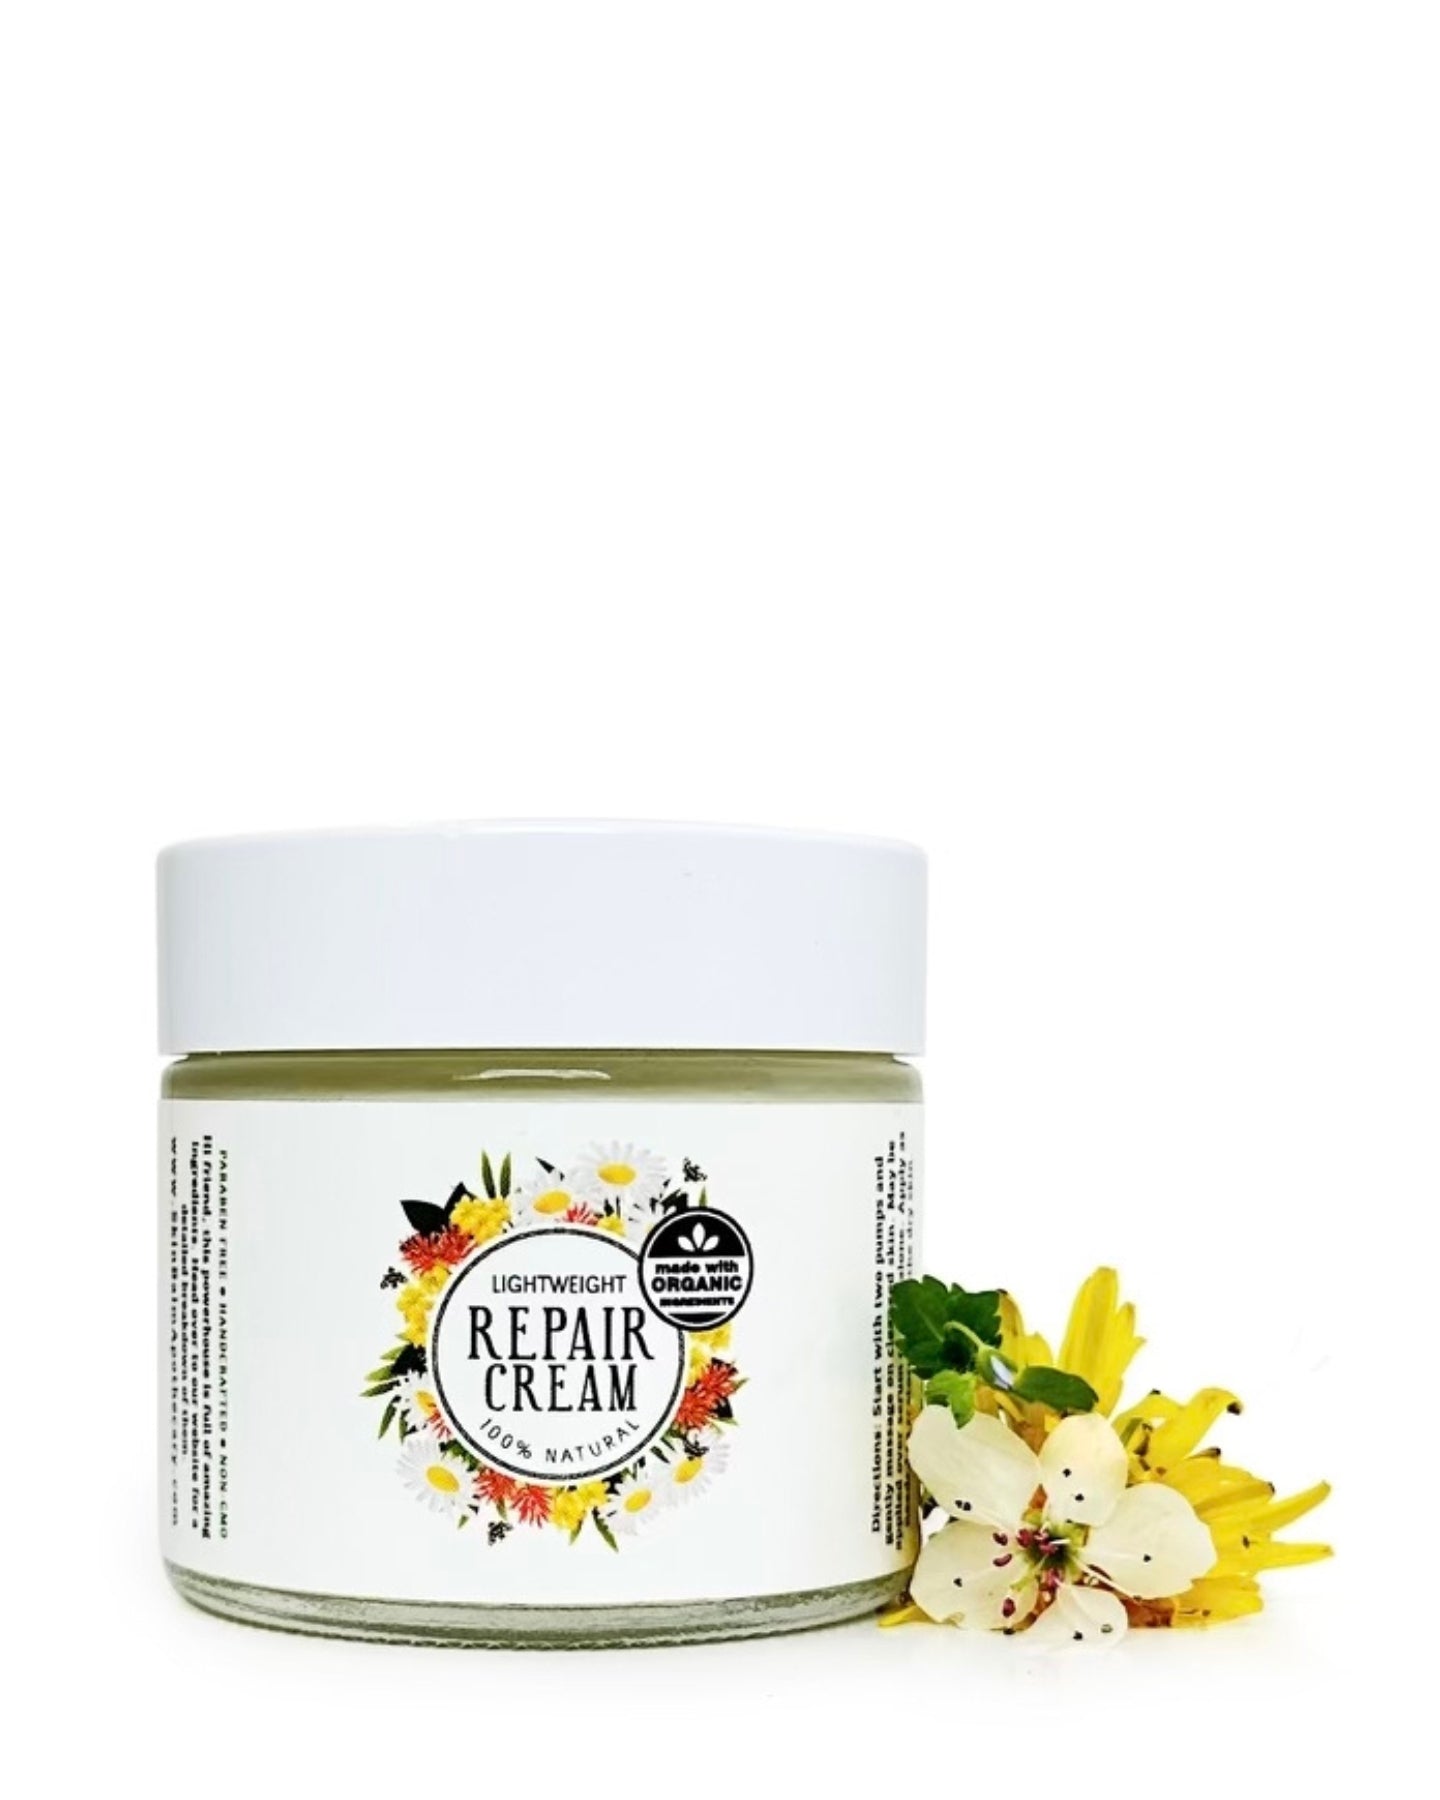 Repair Cream with white and yellow flowers against a white background.